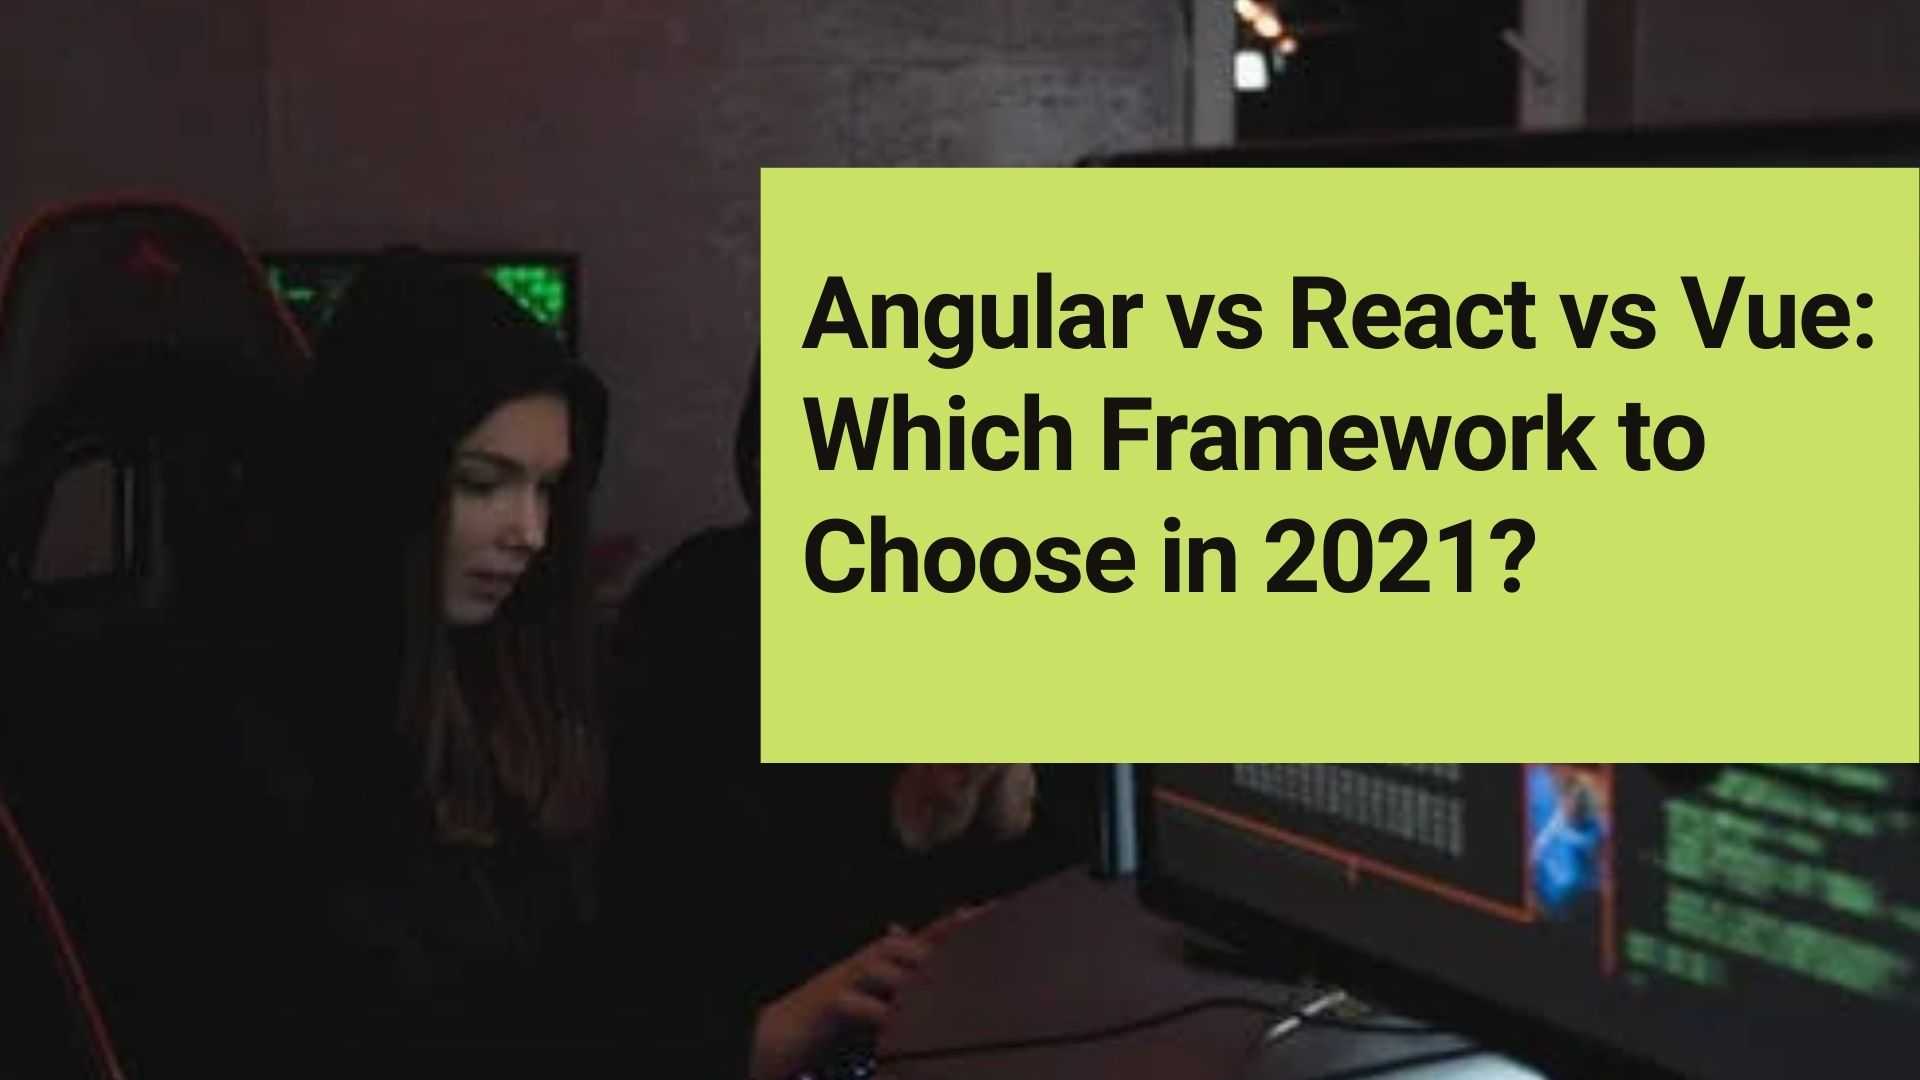 Angular vs React vs Vue: Which Framework to Choose in 2021?